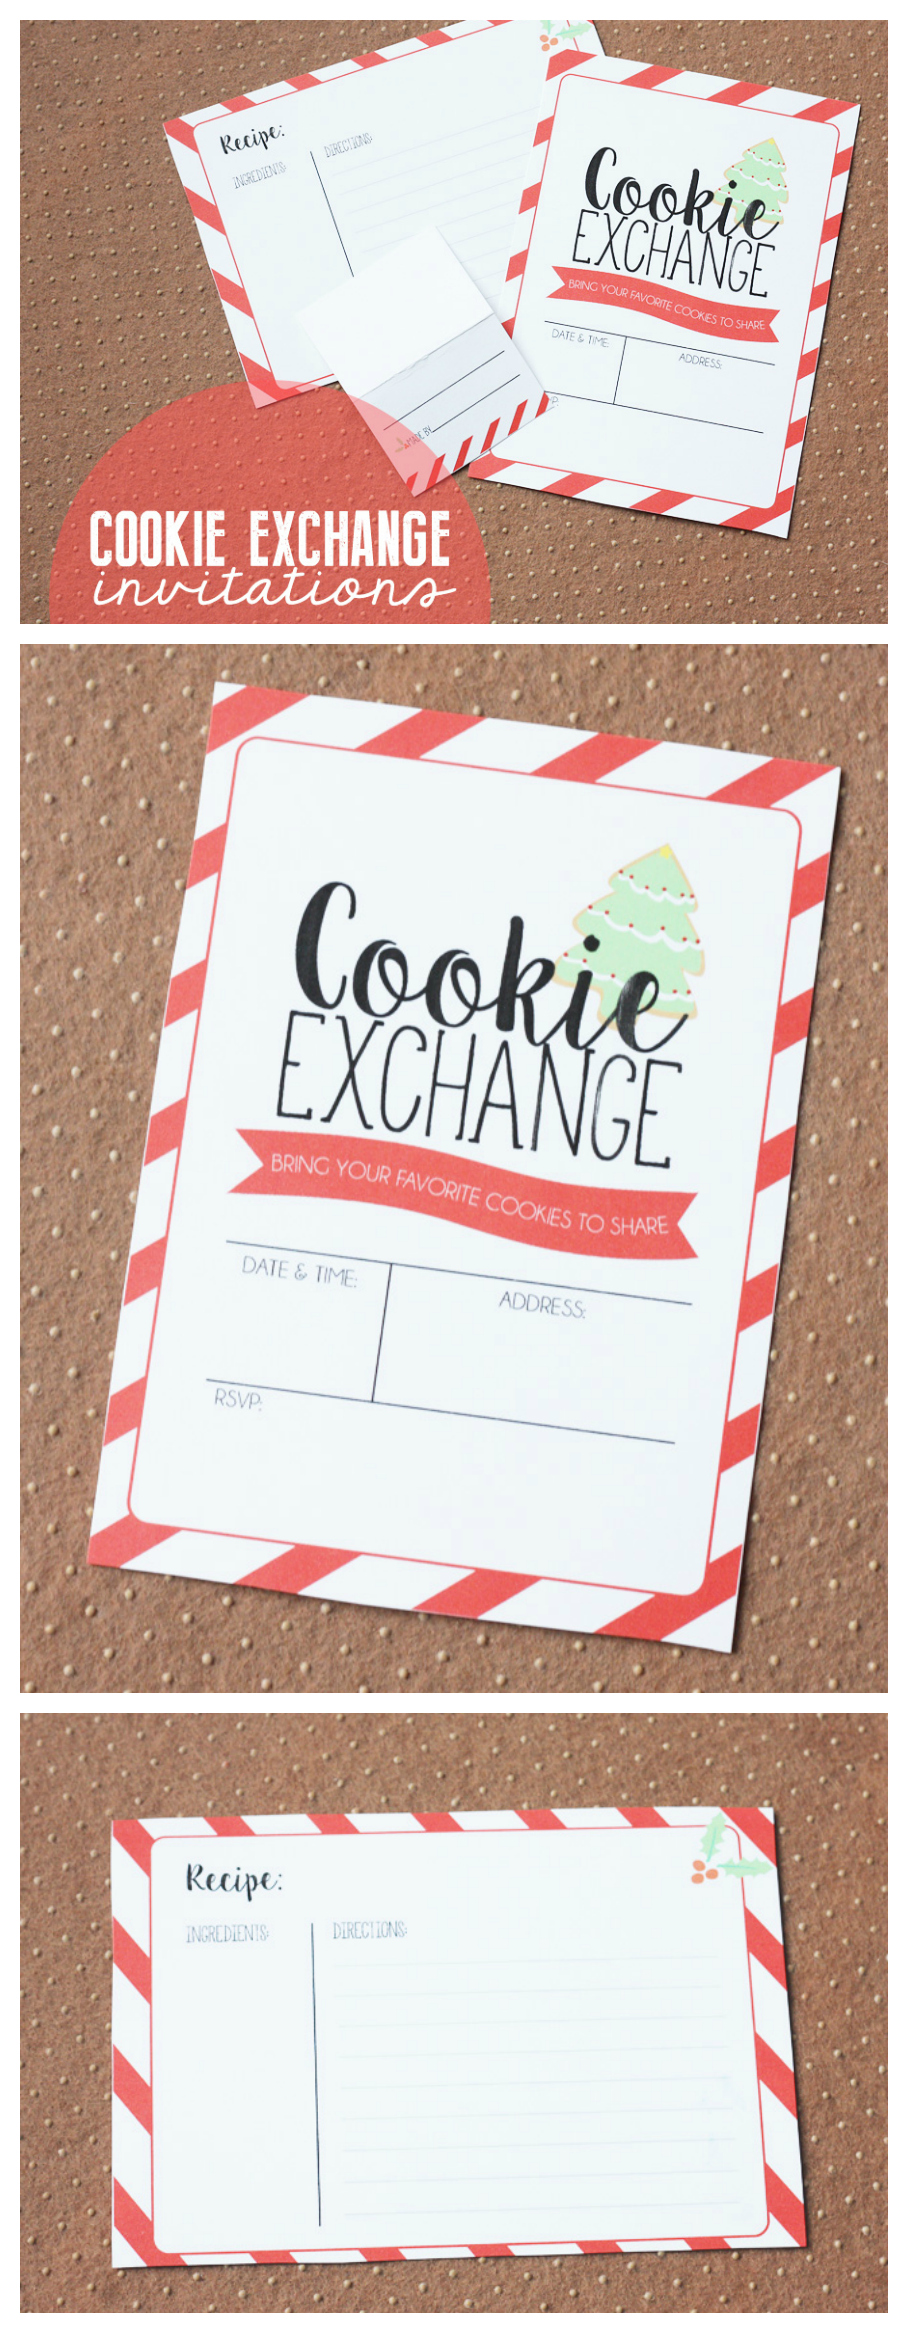 Free Printable Cookie Exchange Invitations and Recipe Cards